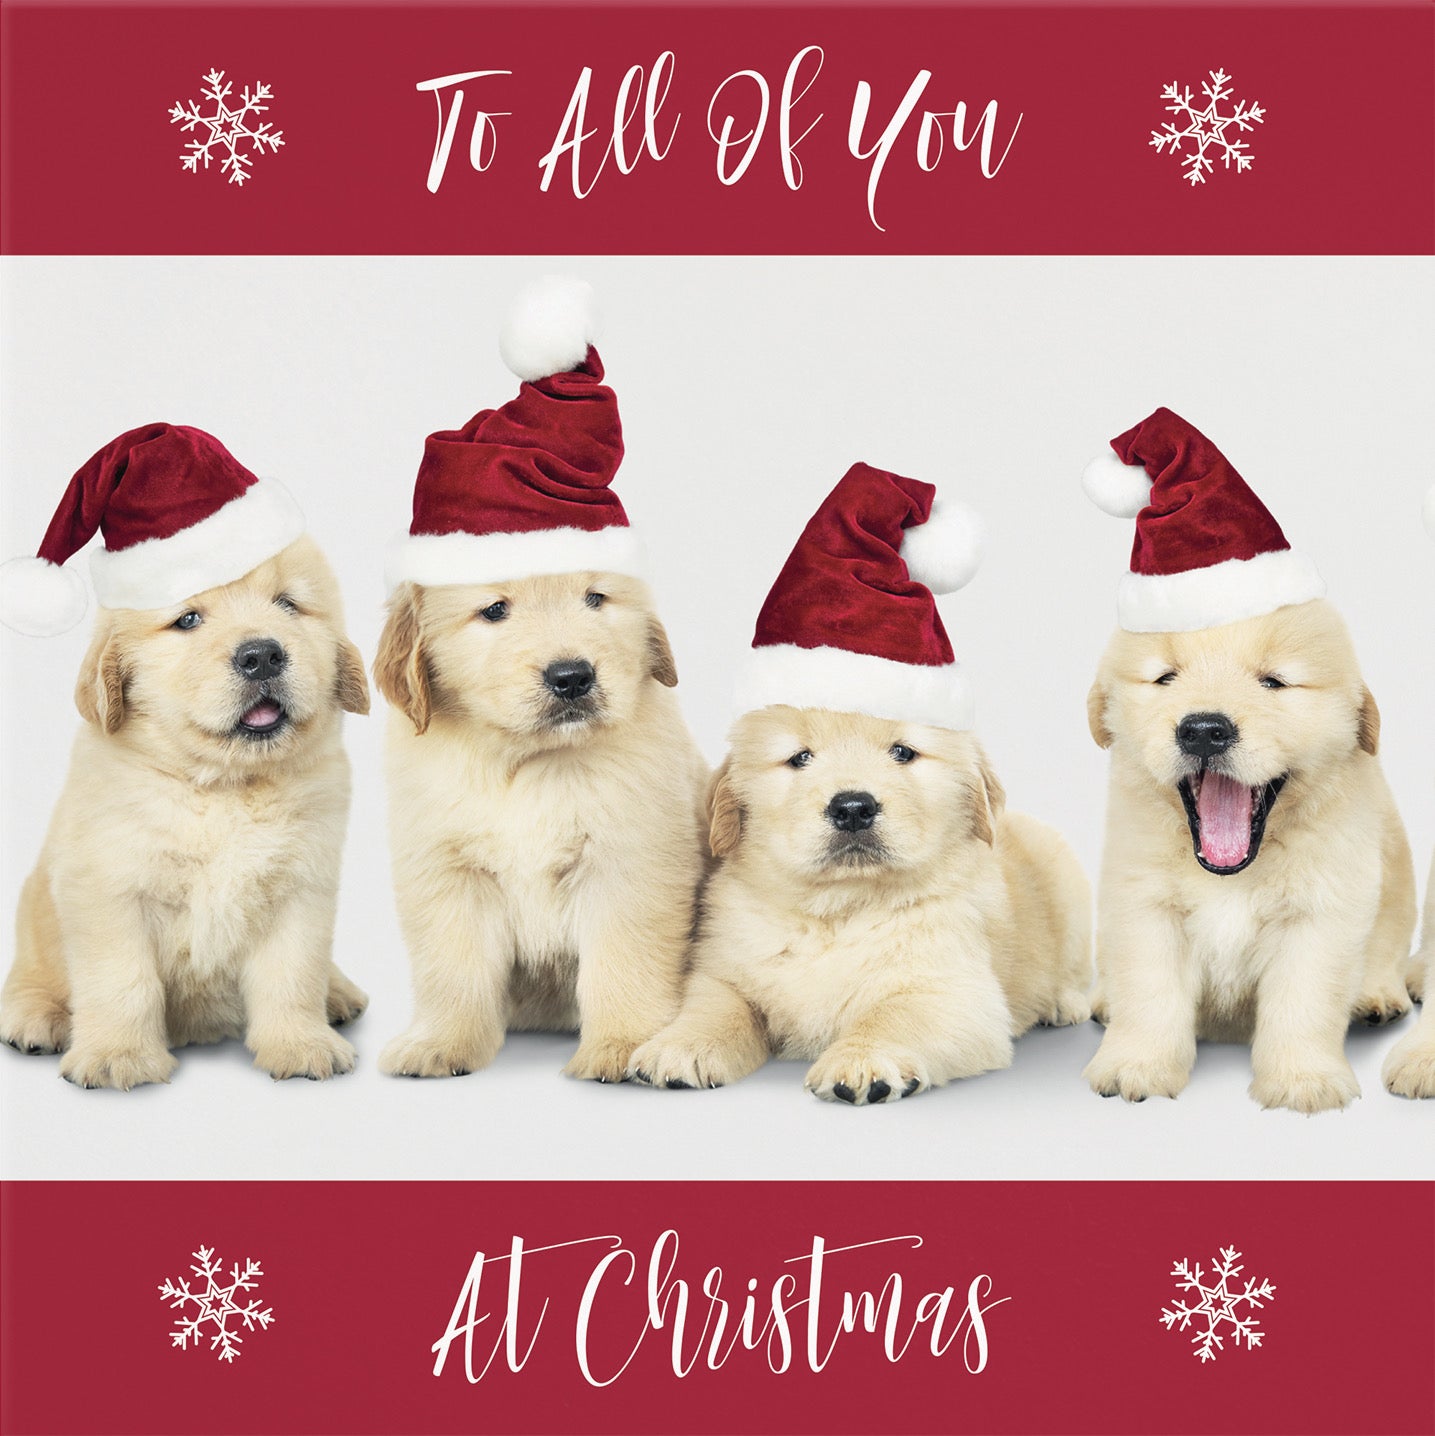 To All Of You Christmas Card Puppy - Default Title (B09JZX15GD)